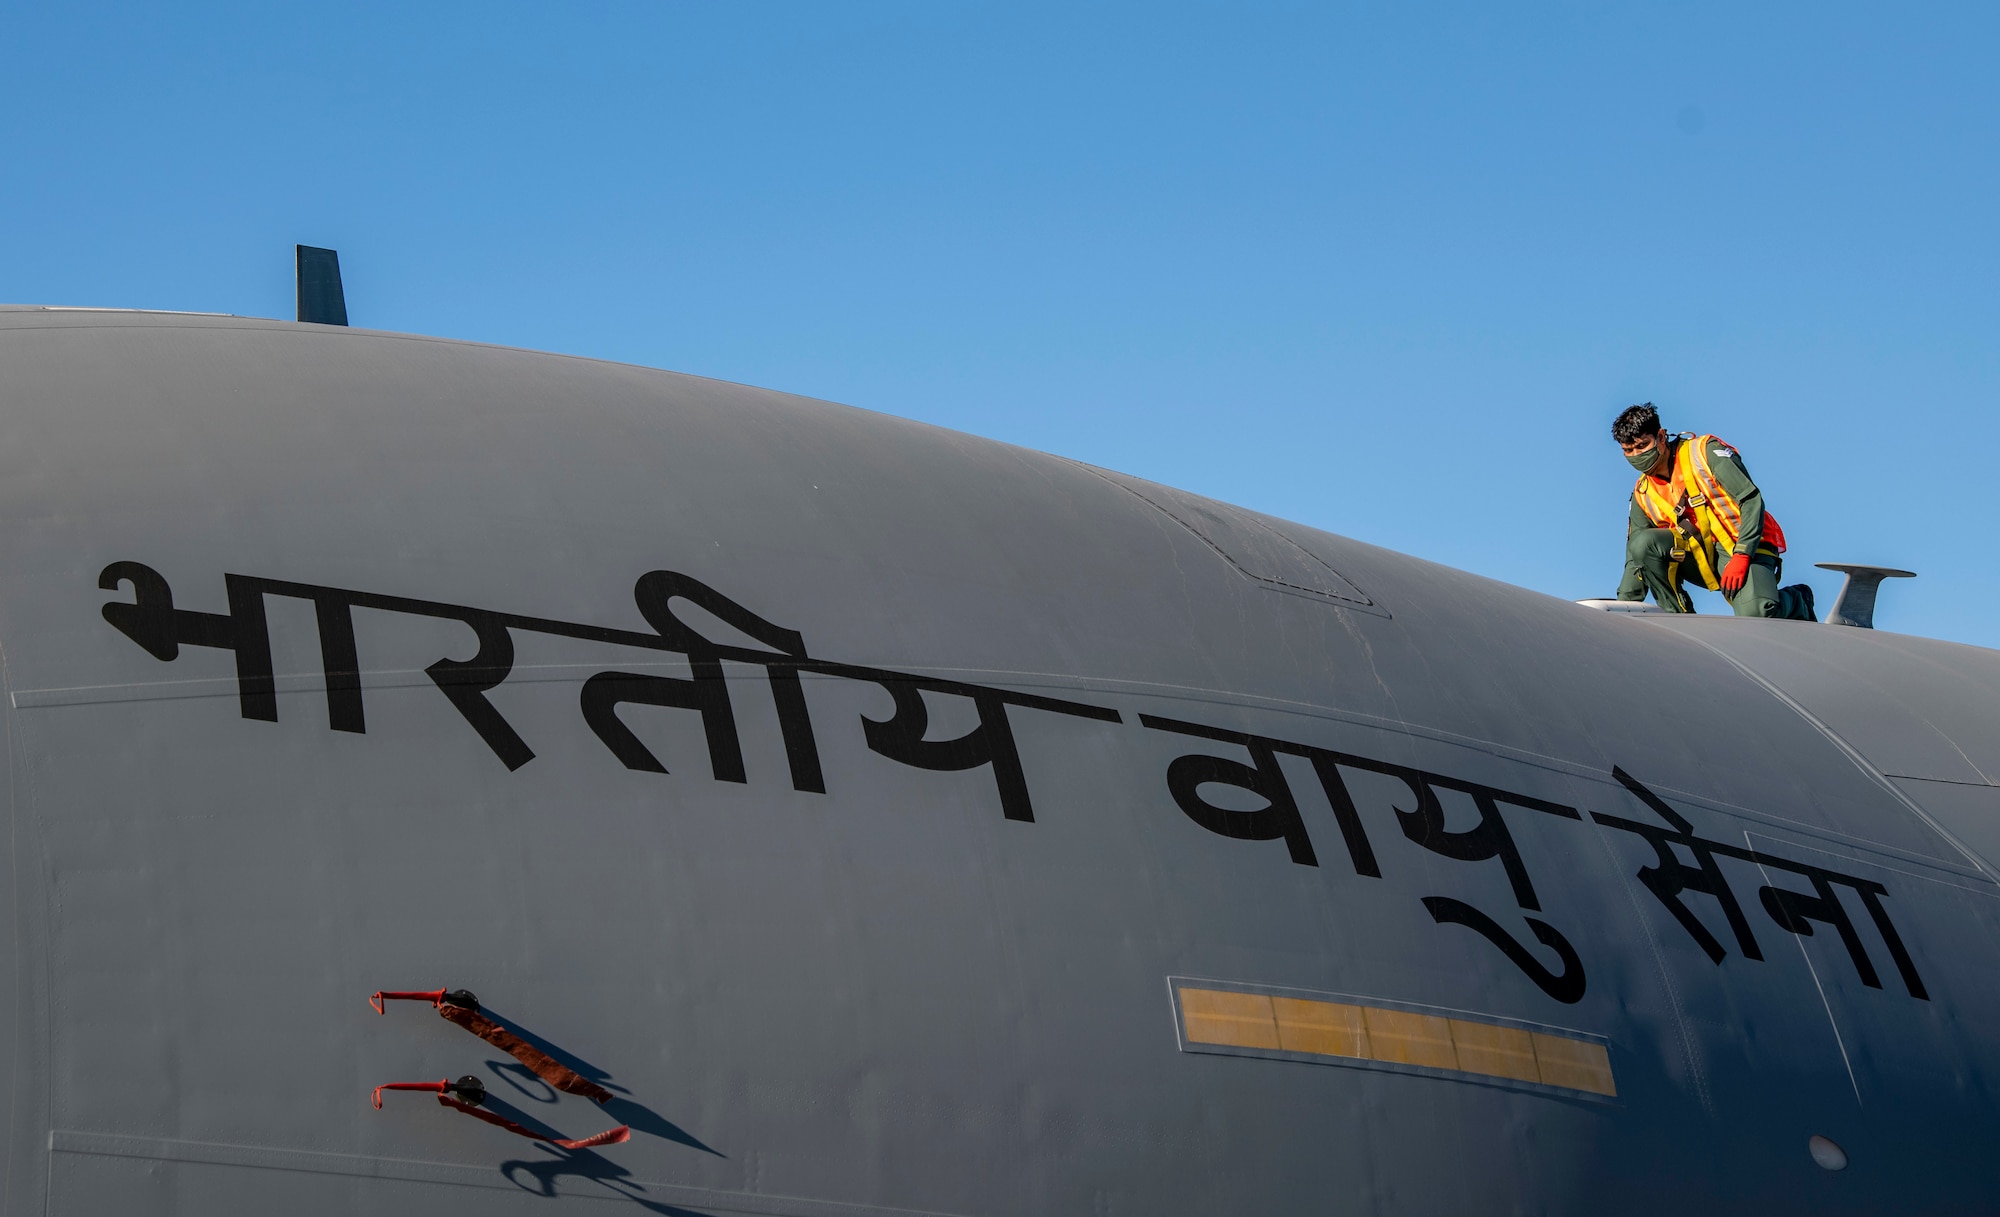 A member of the Indian air force 28th Wing inspects an Indian air force C-17 Globemaster III at Dover Air Force Base, Delaware, Nov. 20, 2020. Dover AFB annually supports $3.5 billion worth of FMS operations due to its strategic location and 436th Aerial Port Squadron, the largest aerial port in the Department of Defense. The United States and India have shared interests in promoting global security, stability and economic prosperity. (U.S. Air Force photo by Senior Airman Christopher Quail)